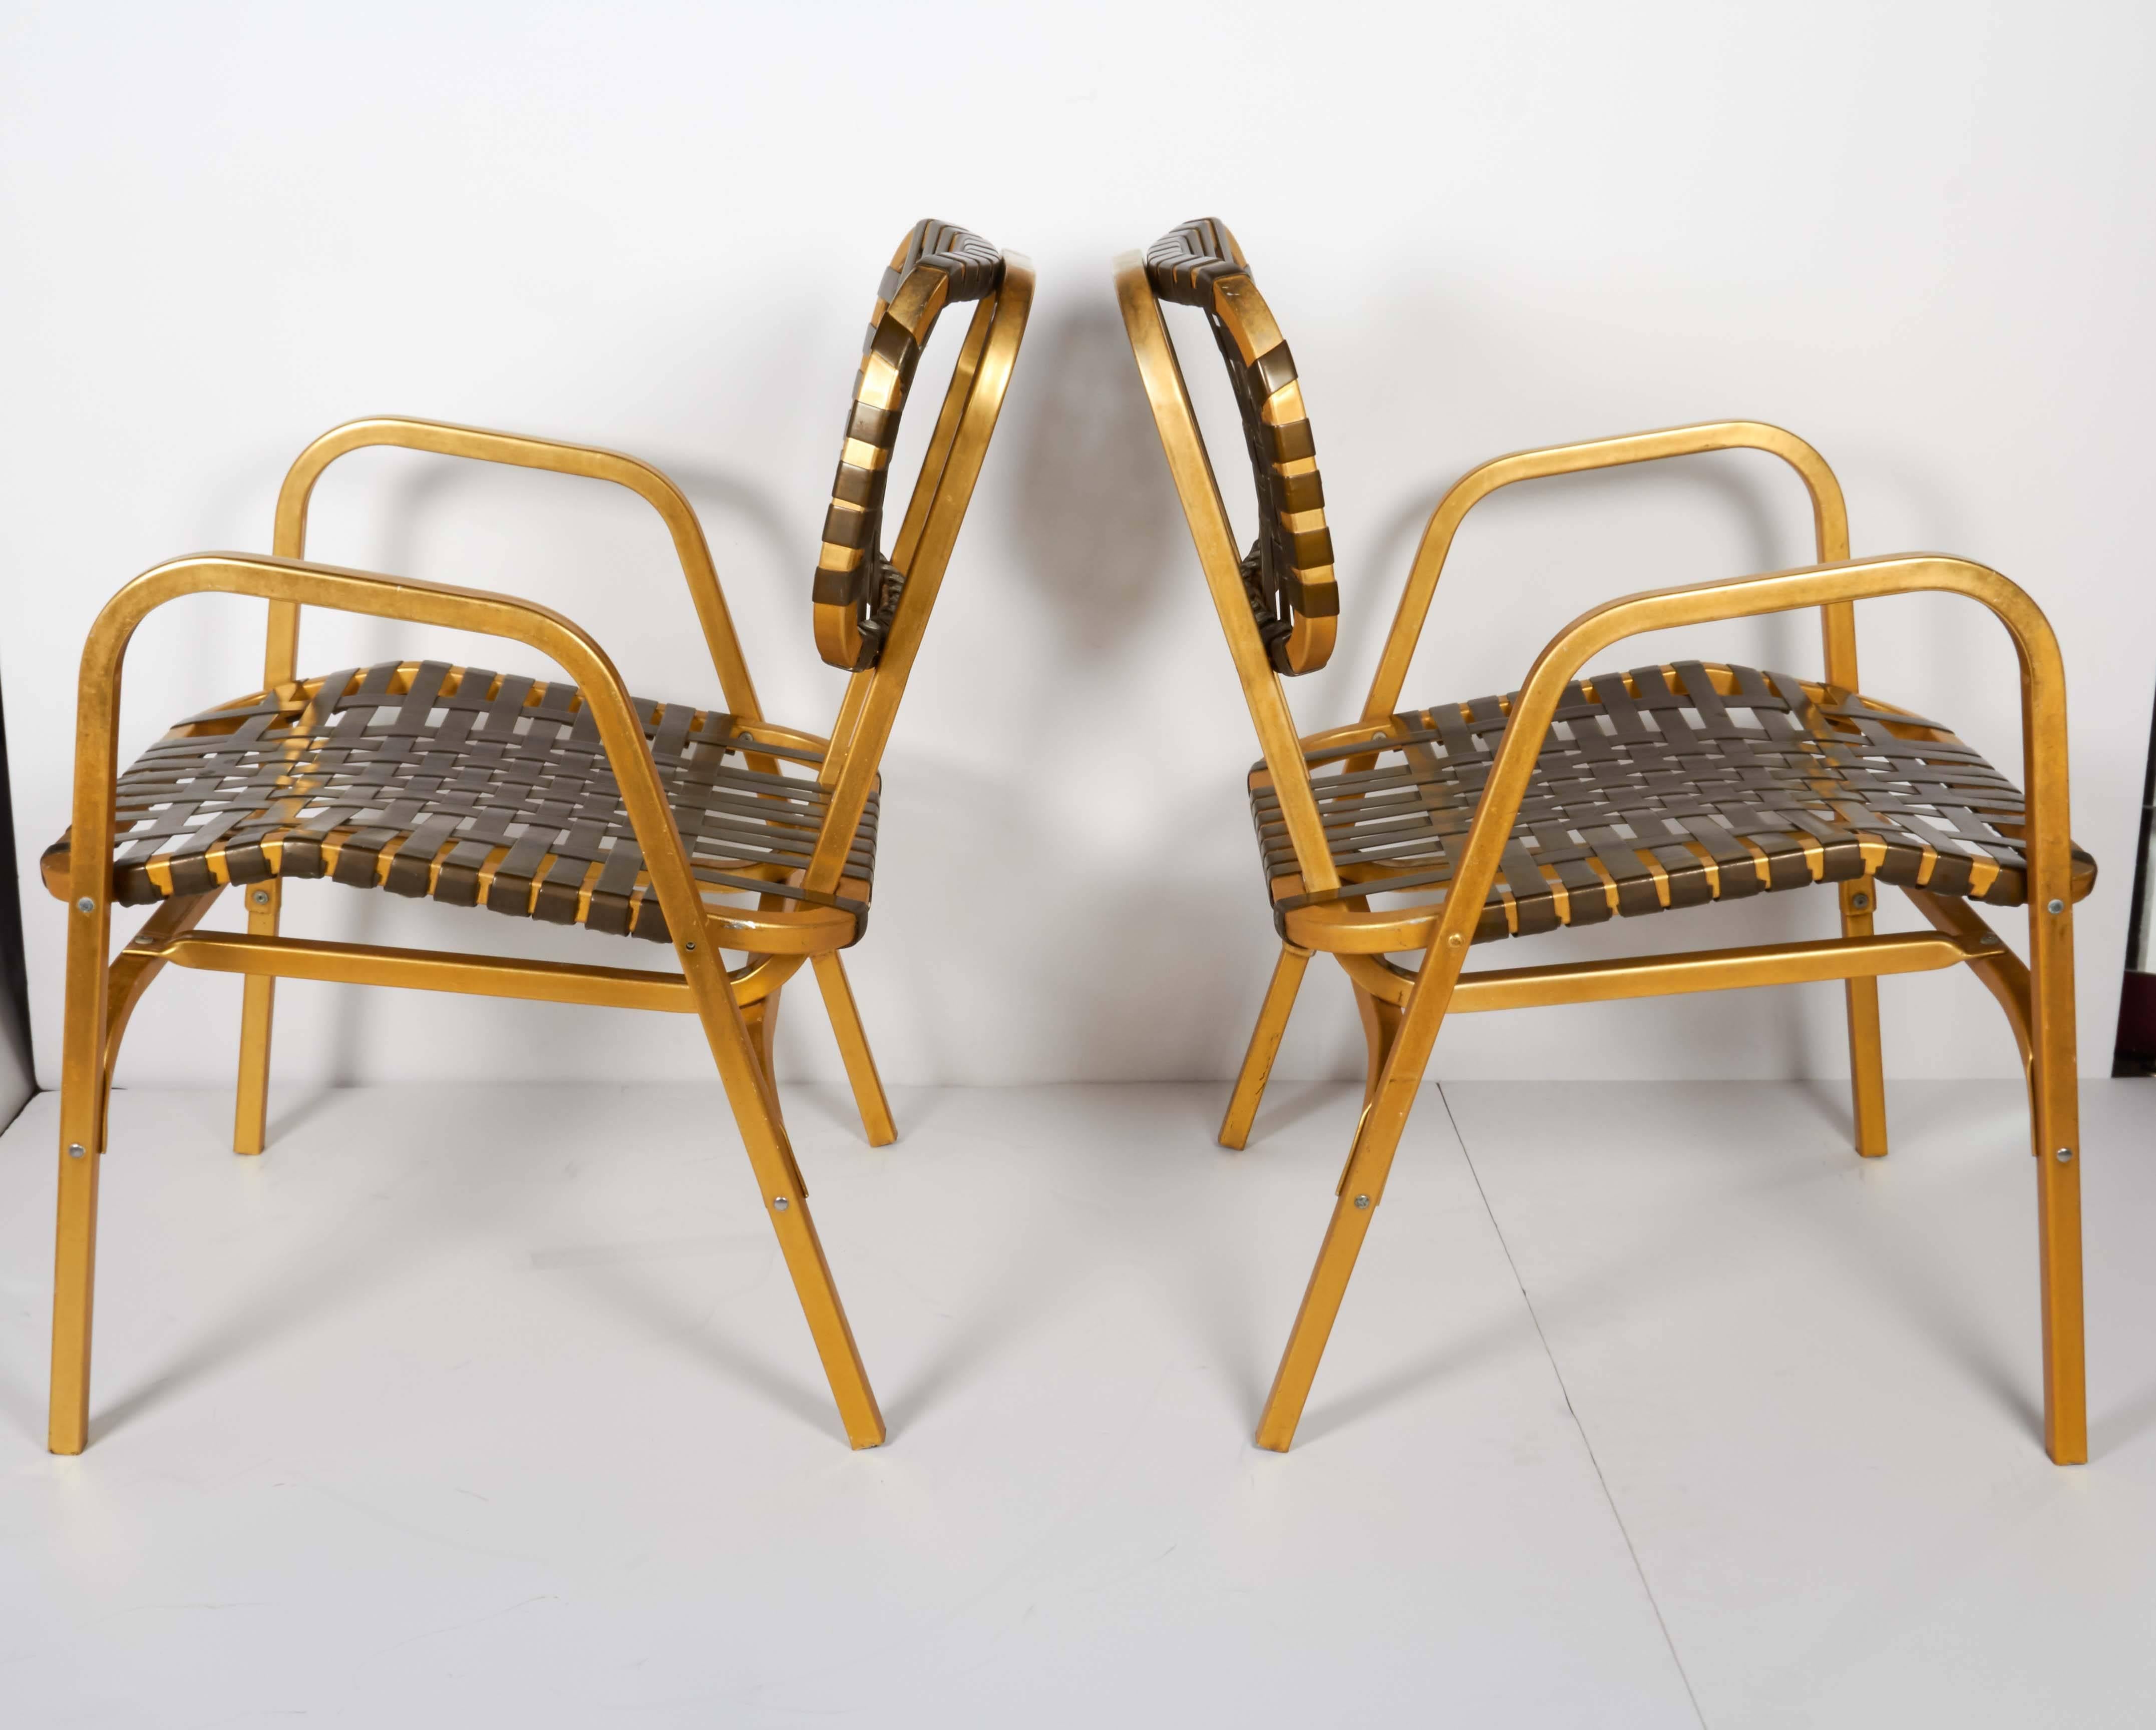 Joyful pair of lawn armchairs with lightweight aluminum frames with brass coated finish. Highly stylized design with uber chic Mid-Century modernist silhouettes. Chairs feature original woven vinyl bands in deep brown hues across the backs and